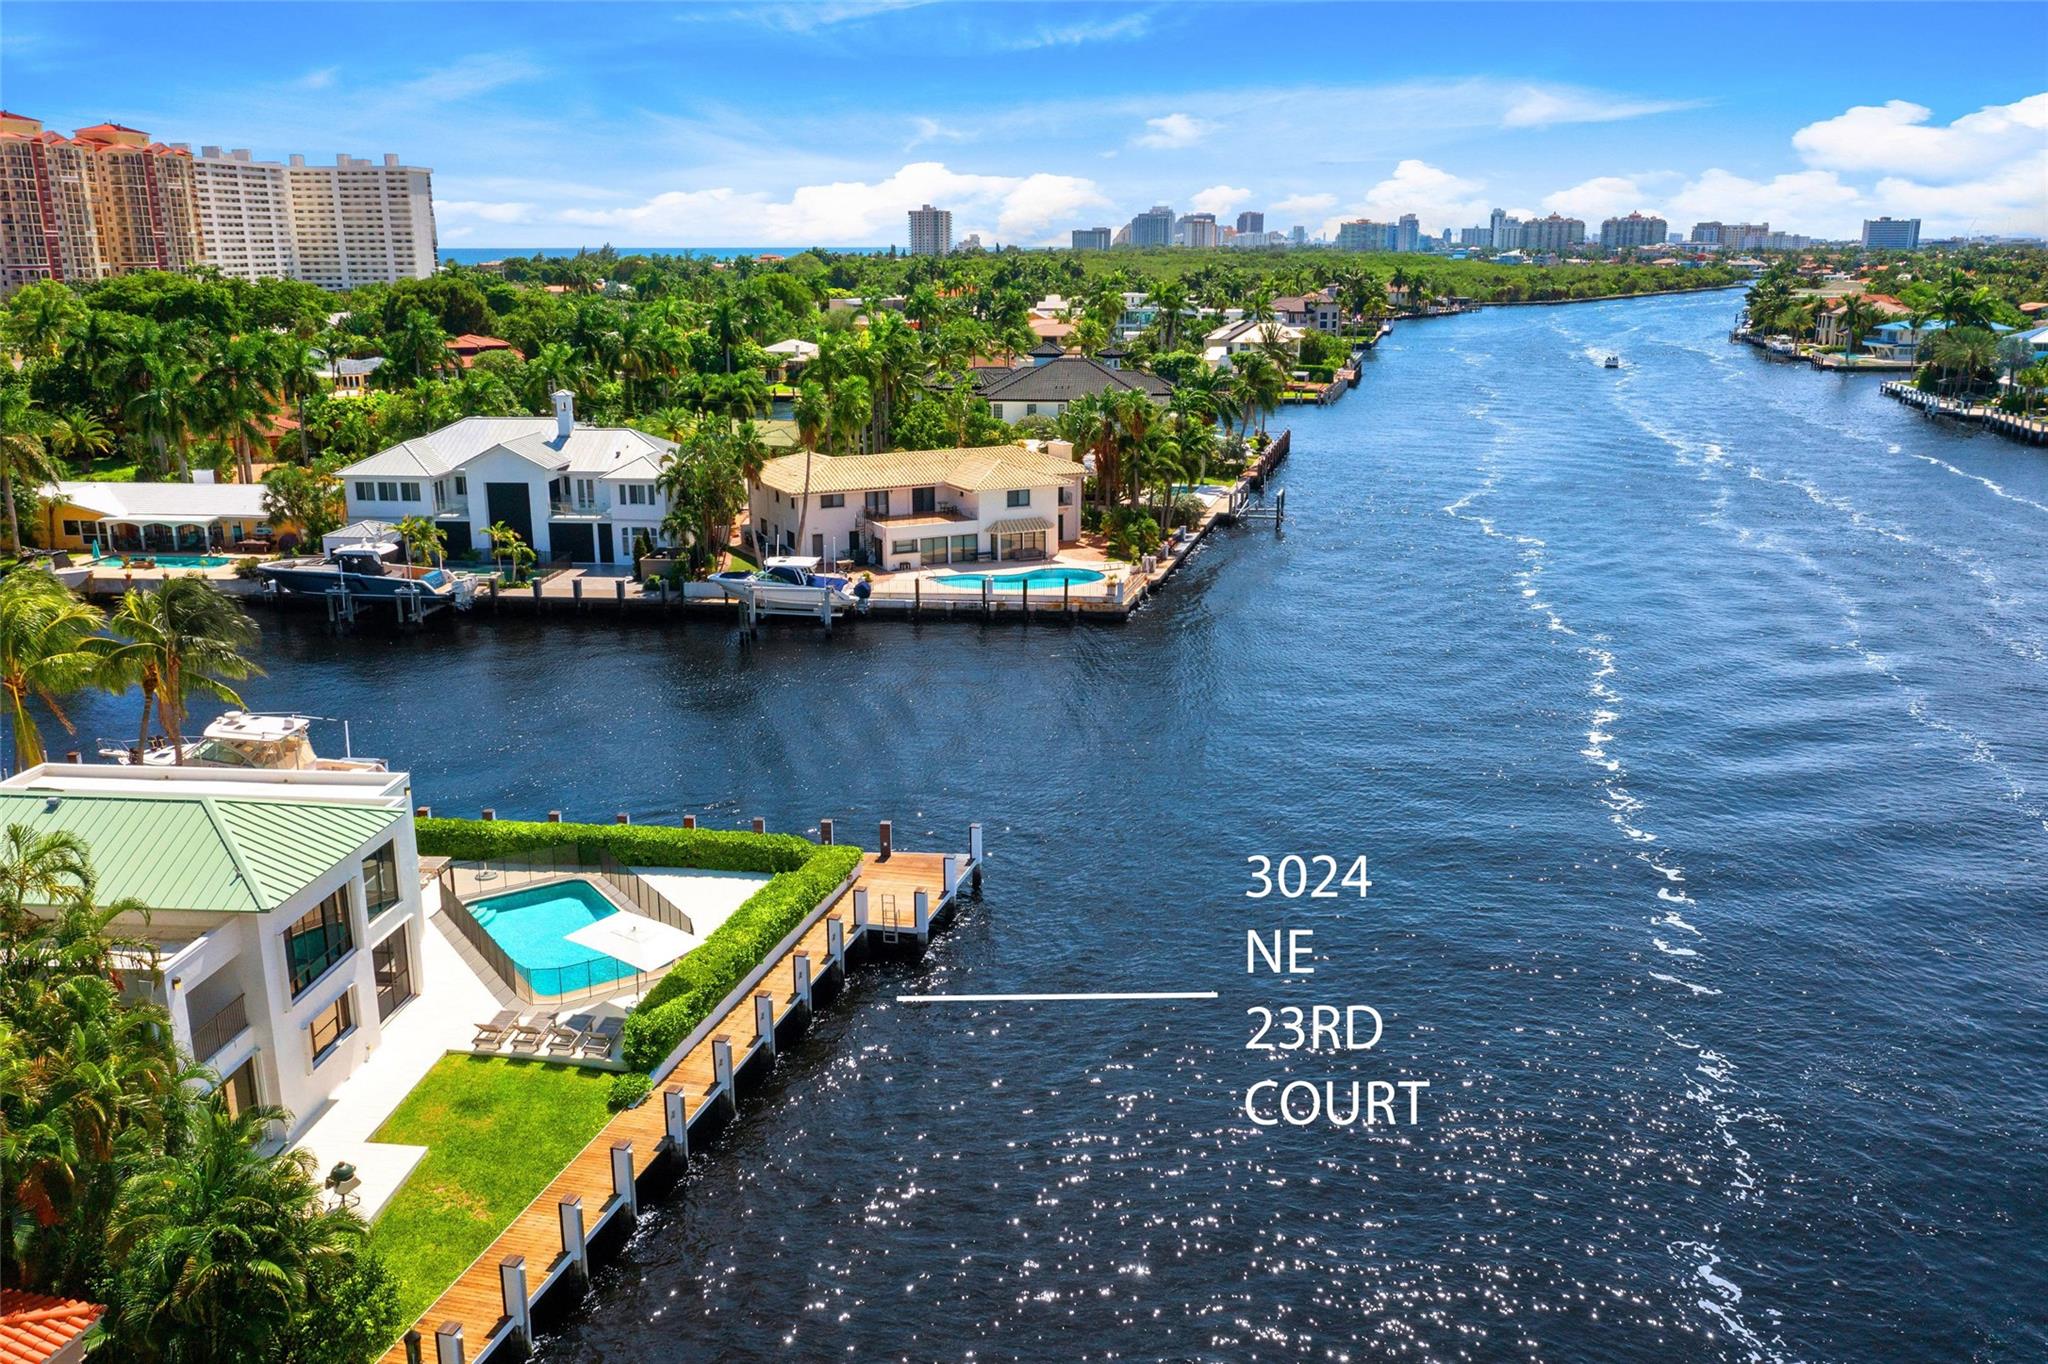 SALE FELL THROUGH - BACK ON THE MARKET | INTRACOASTAL POINT WITH SPECTACULAR SOUTH PANORAMAS | SITED BETWEEN THE OCEAN & INTRACOASTAL | LOT: 15,712± FT & 0.36± ACRES | 
WALK TO BIRCH STATE PARK | 100± FT DIRECT INTRACOASTAL & 140± FT FRONTAGE WIDE CANAL |
DEEP DRAFT FOR 130± FT YACHT | FEATURES A WRAPAROUND NEWER DOCK | EQUIPPED WITH BOAT LIFT AND SEPARATE JET SKIS PLATFORM | CONTEMPORARY HOME WITH WALLS OF GLASS FOR WIDE PANORAMAS | 
2-STORY GREAT ROOM | SCREEN ENCLOSED LANAI | METAL ROOF | THREE ENSUITE BEDROOMS ON FIRST LEVEL | PRIMARY BEDROOM HAS 11.5± FT CEILINGS & LOCATED ON THE 2ND LEVEL WITH WIDE WATER VIEWS, SITTING AREA & AN OFFICE | BEACH, RESTAURANTS, GROCERIES ALL IN CLOSES PROXIMITY |
HOUSE REBUILT 1987 SOME OLDER AREAS